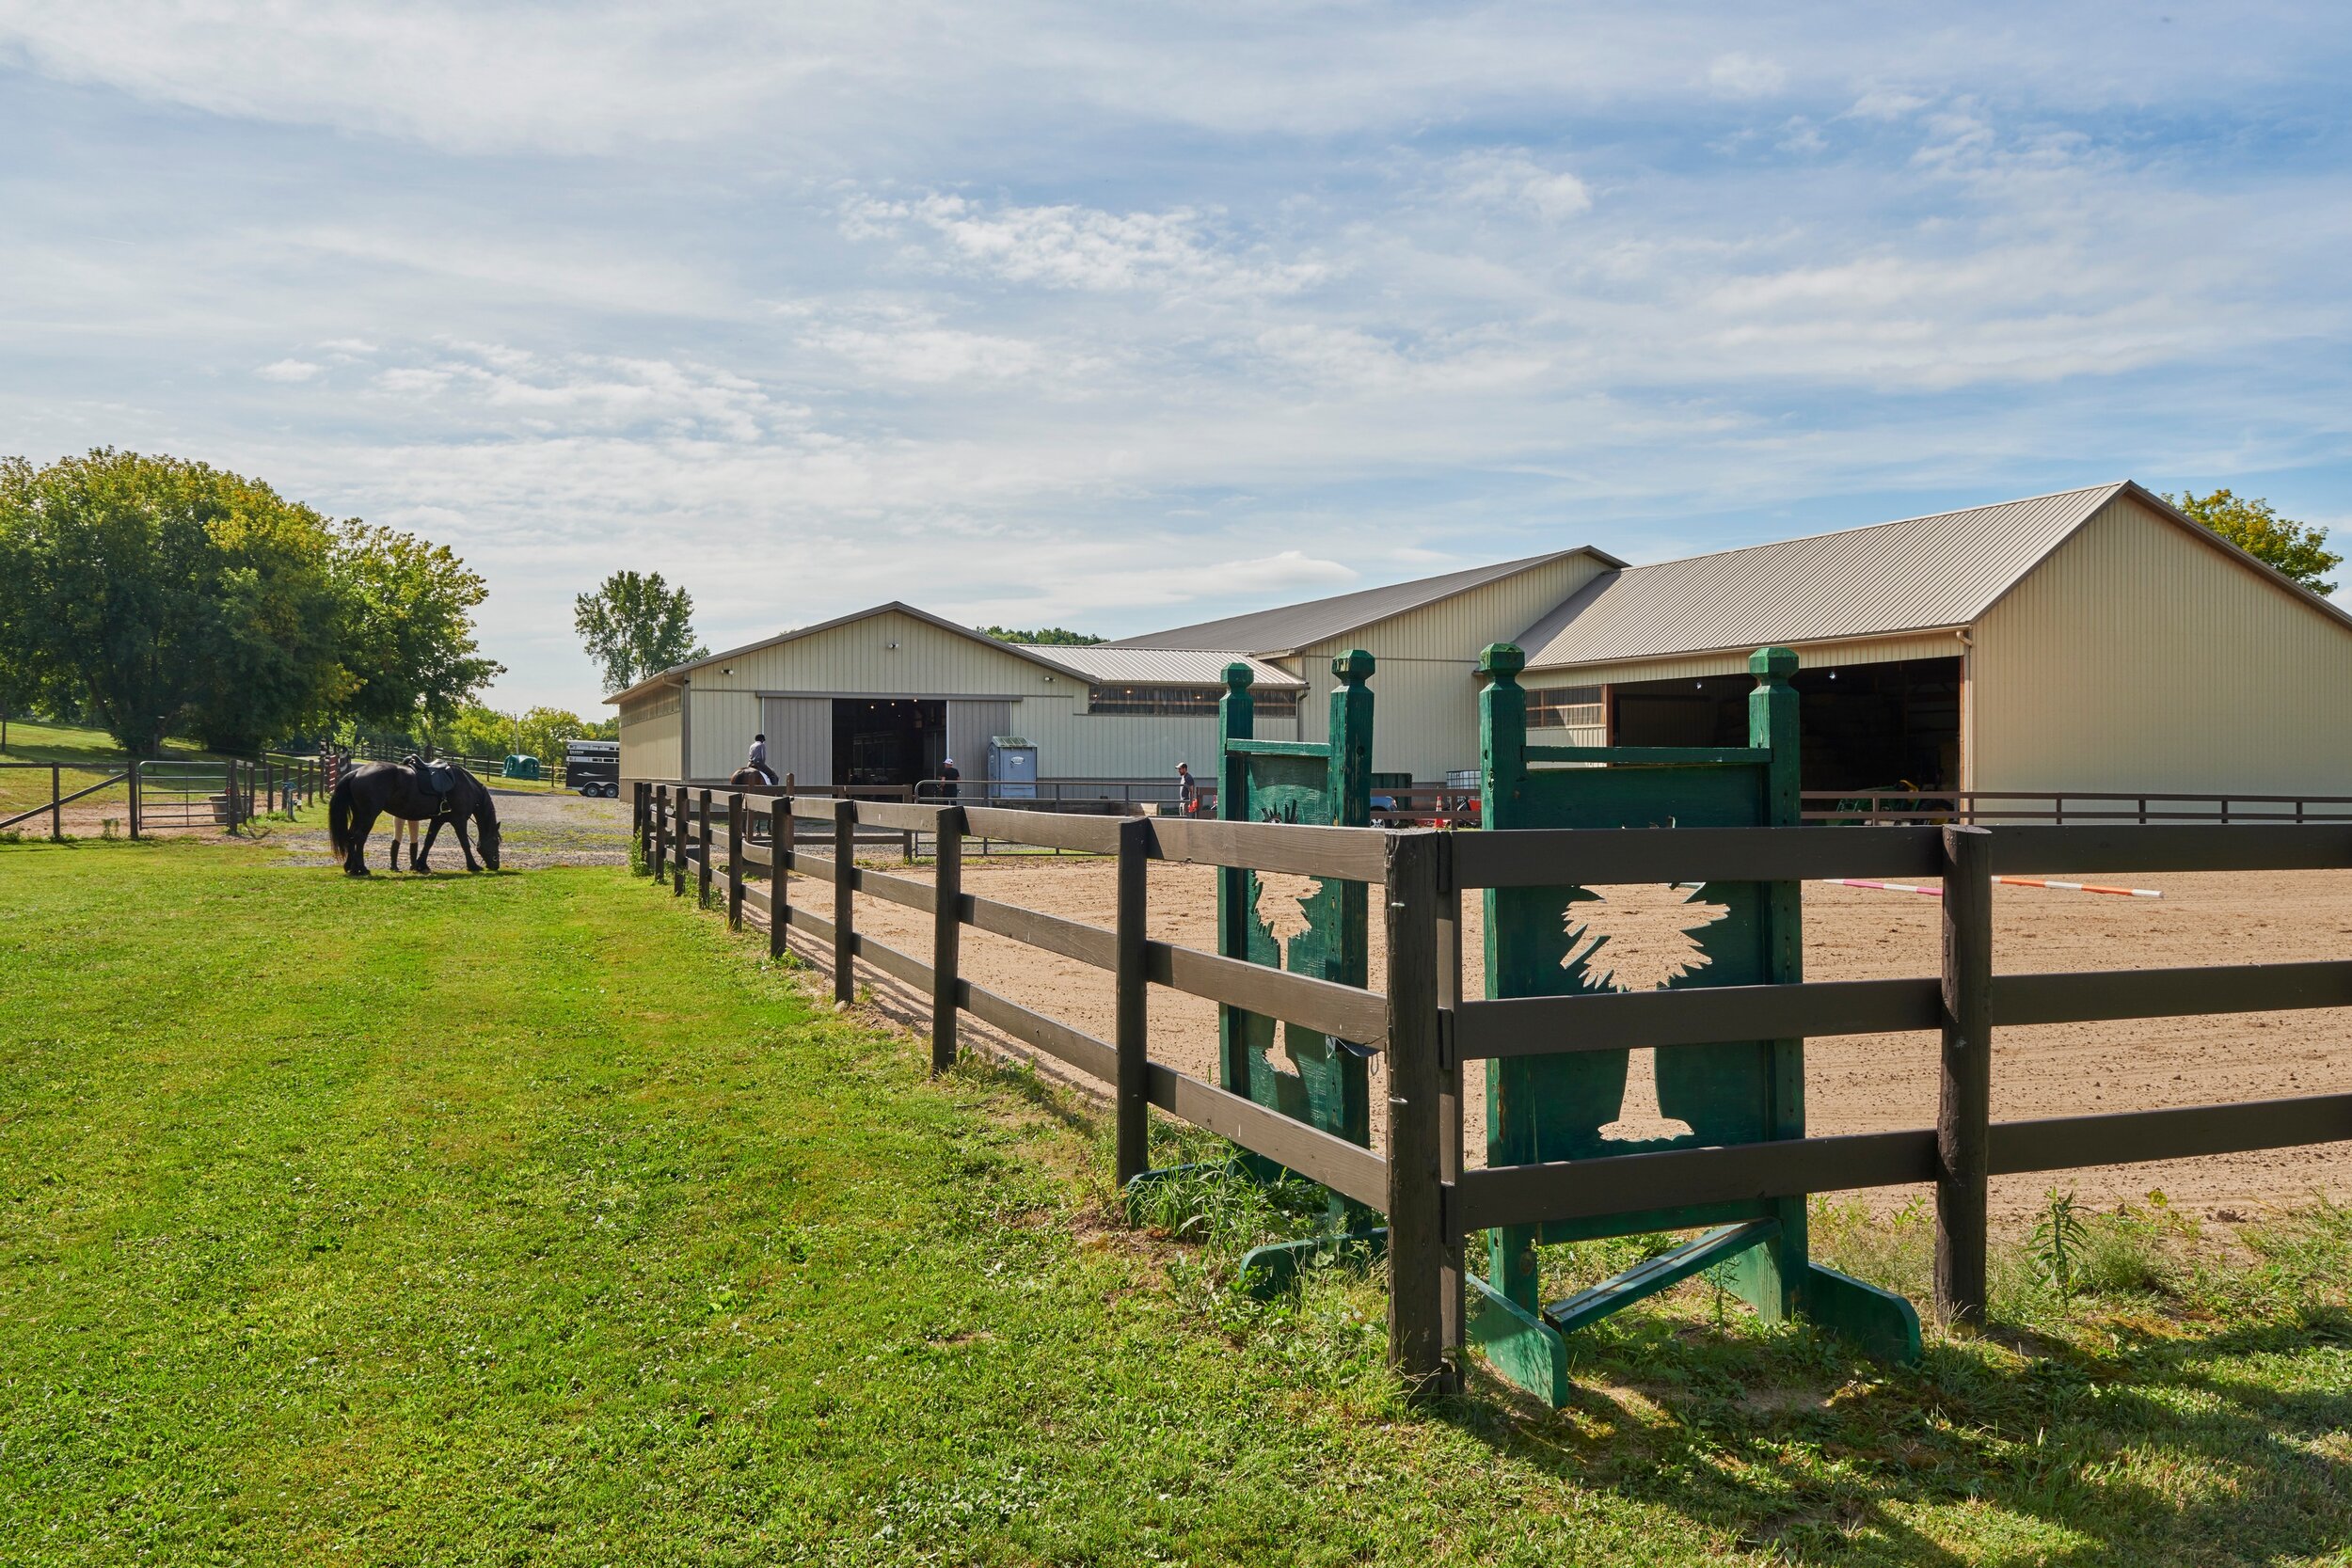 51 for sale 10050 Short Cut Rd, Weedsport, NY horse riding stables farm ranch equestrian property for .JPG